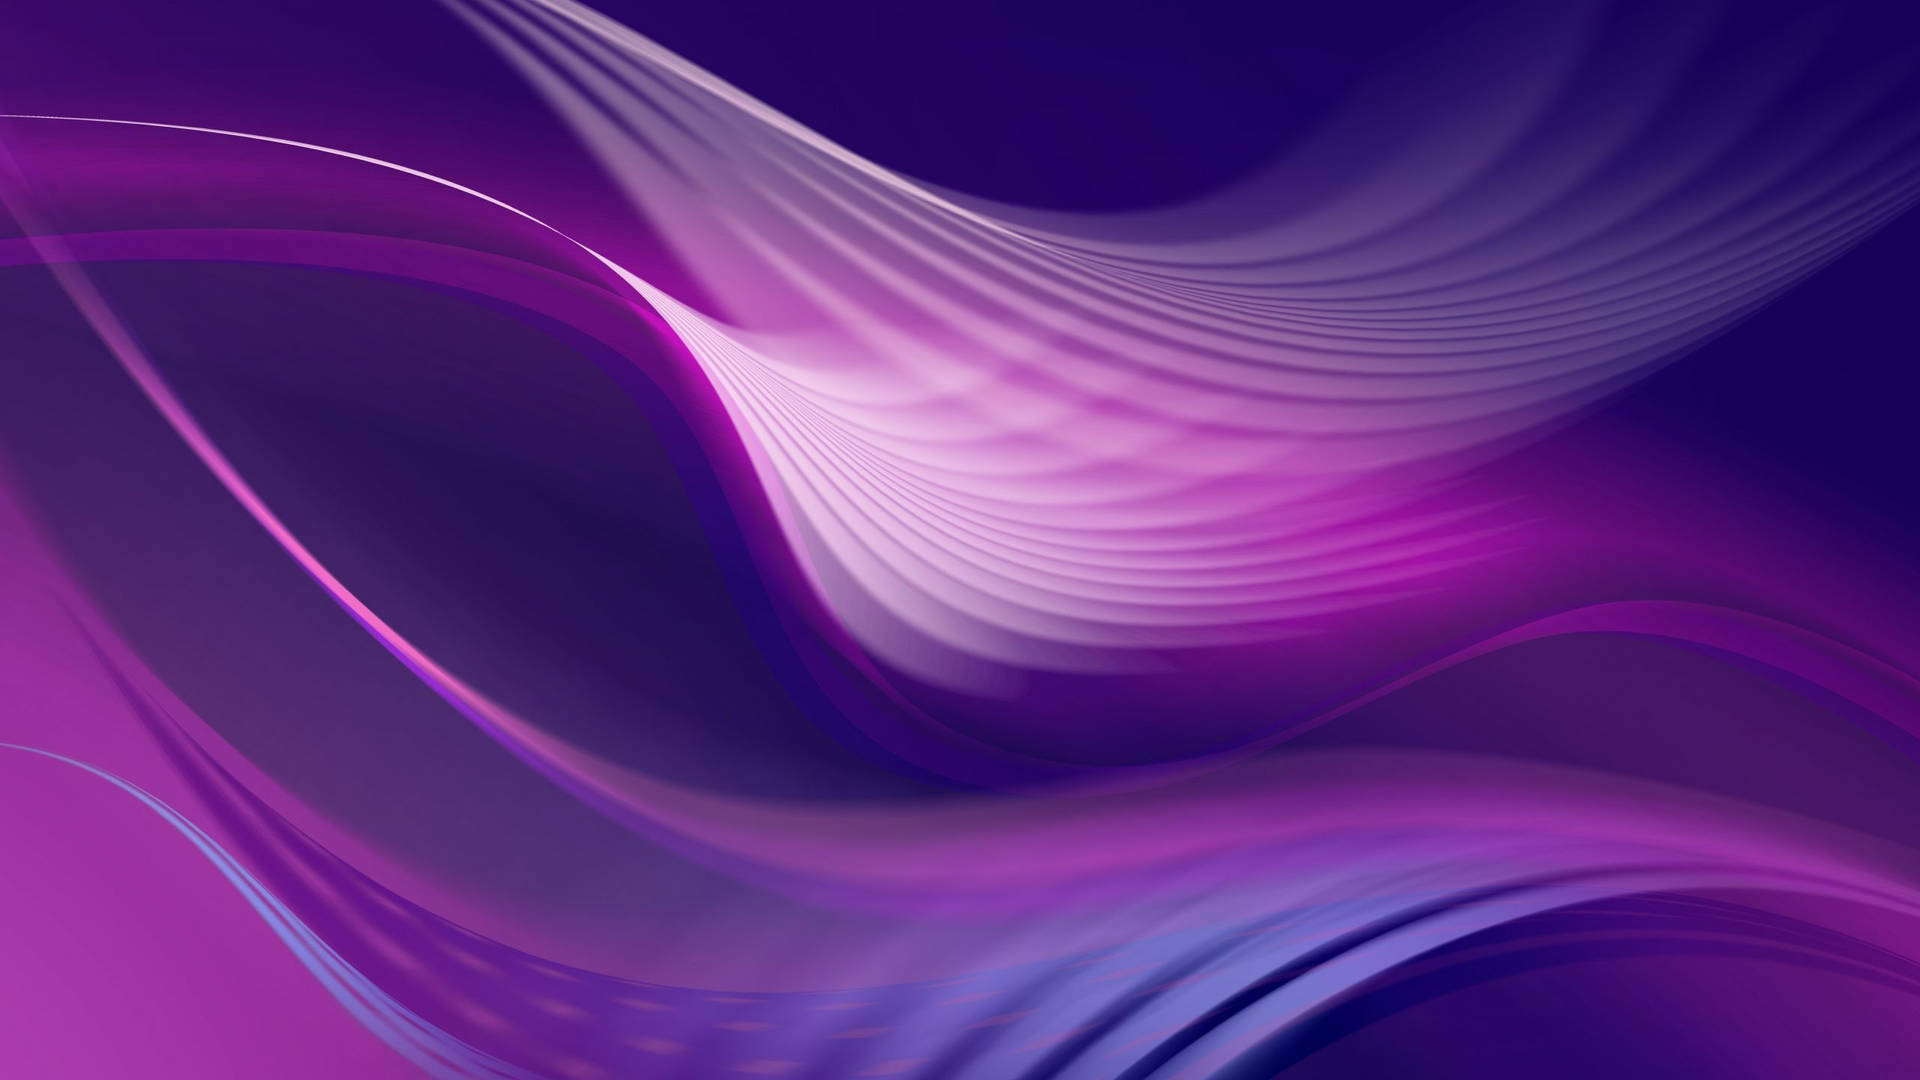 Violet Aesthetic Close-up Abstract Art